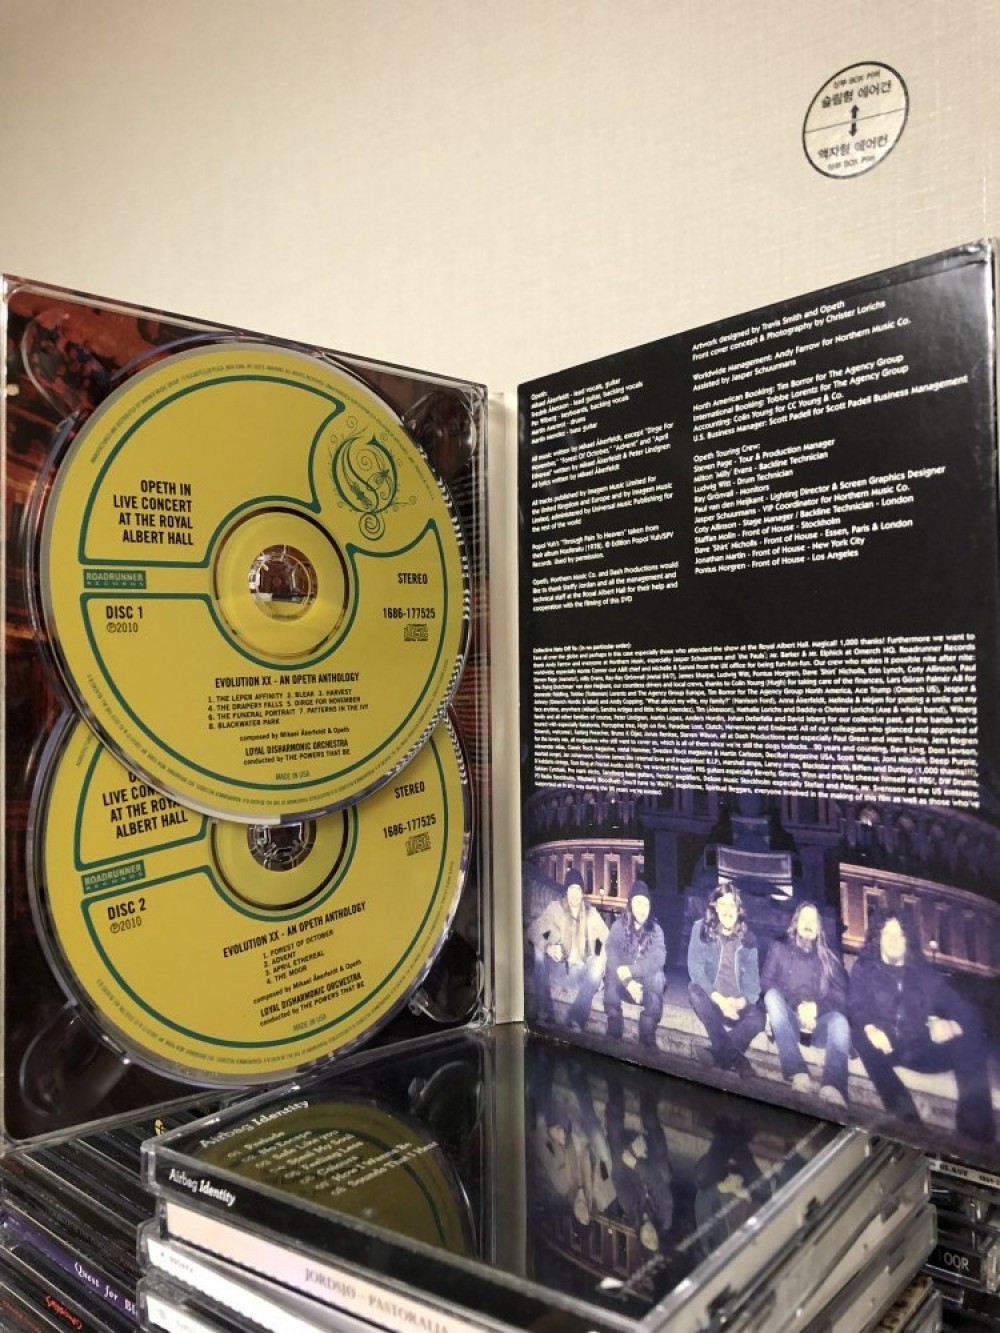 Opeth - In Live Concert at the Royal Albert Hall CD, DVD Photo | Metal ...